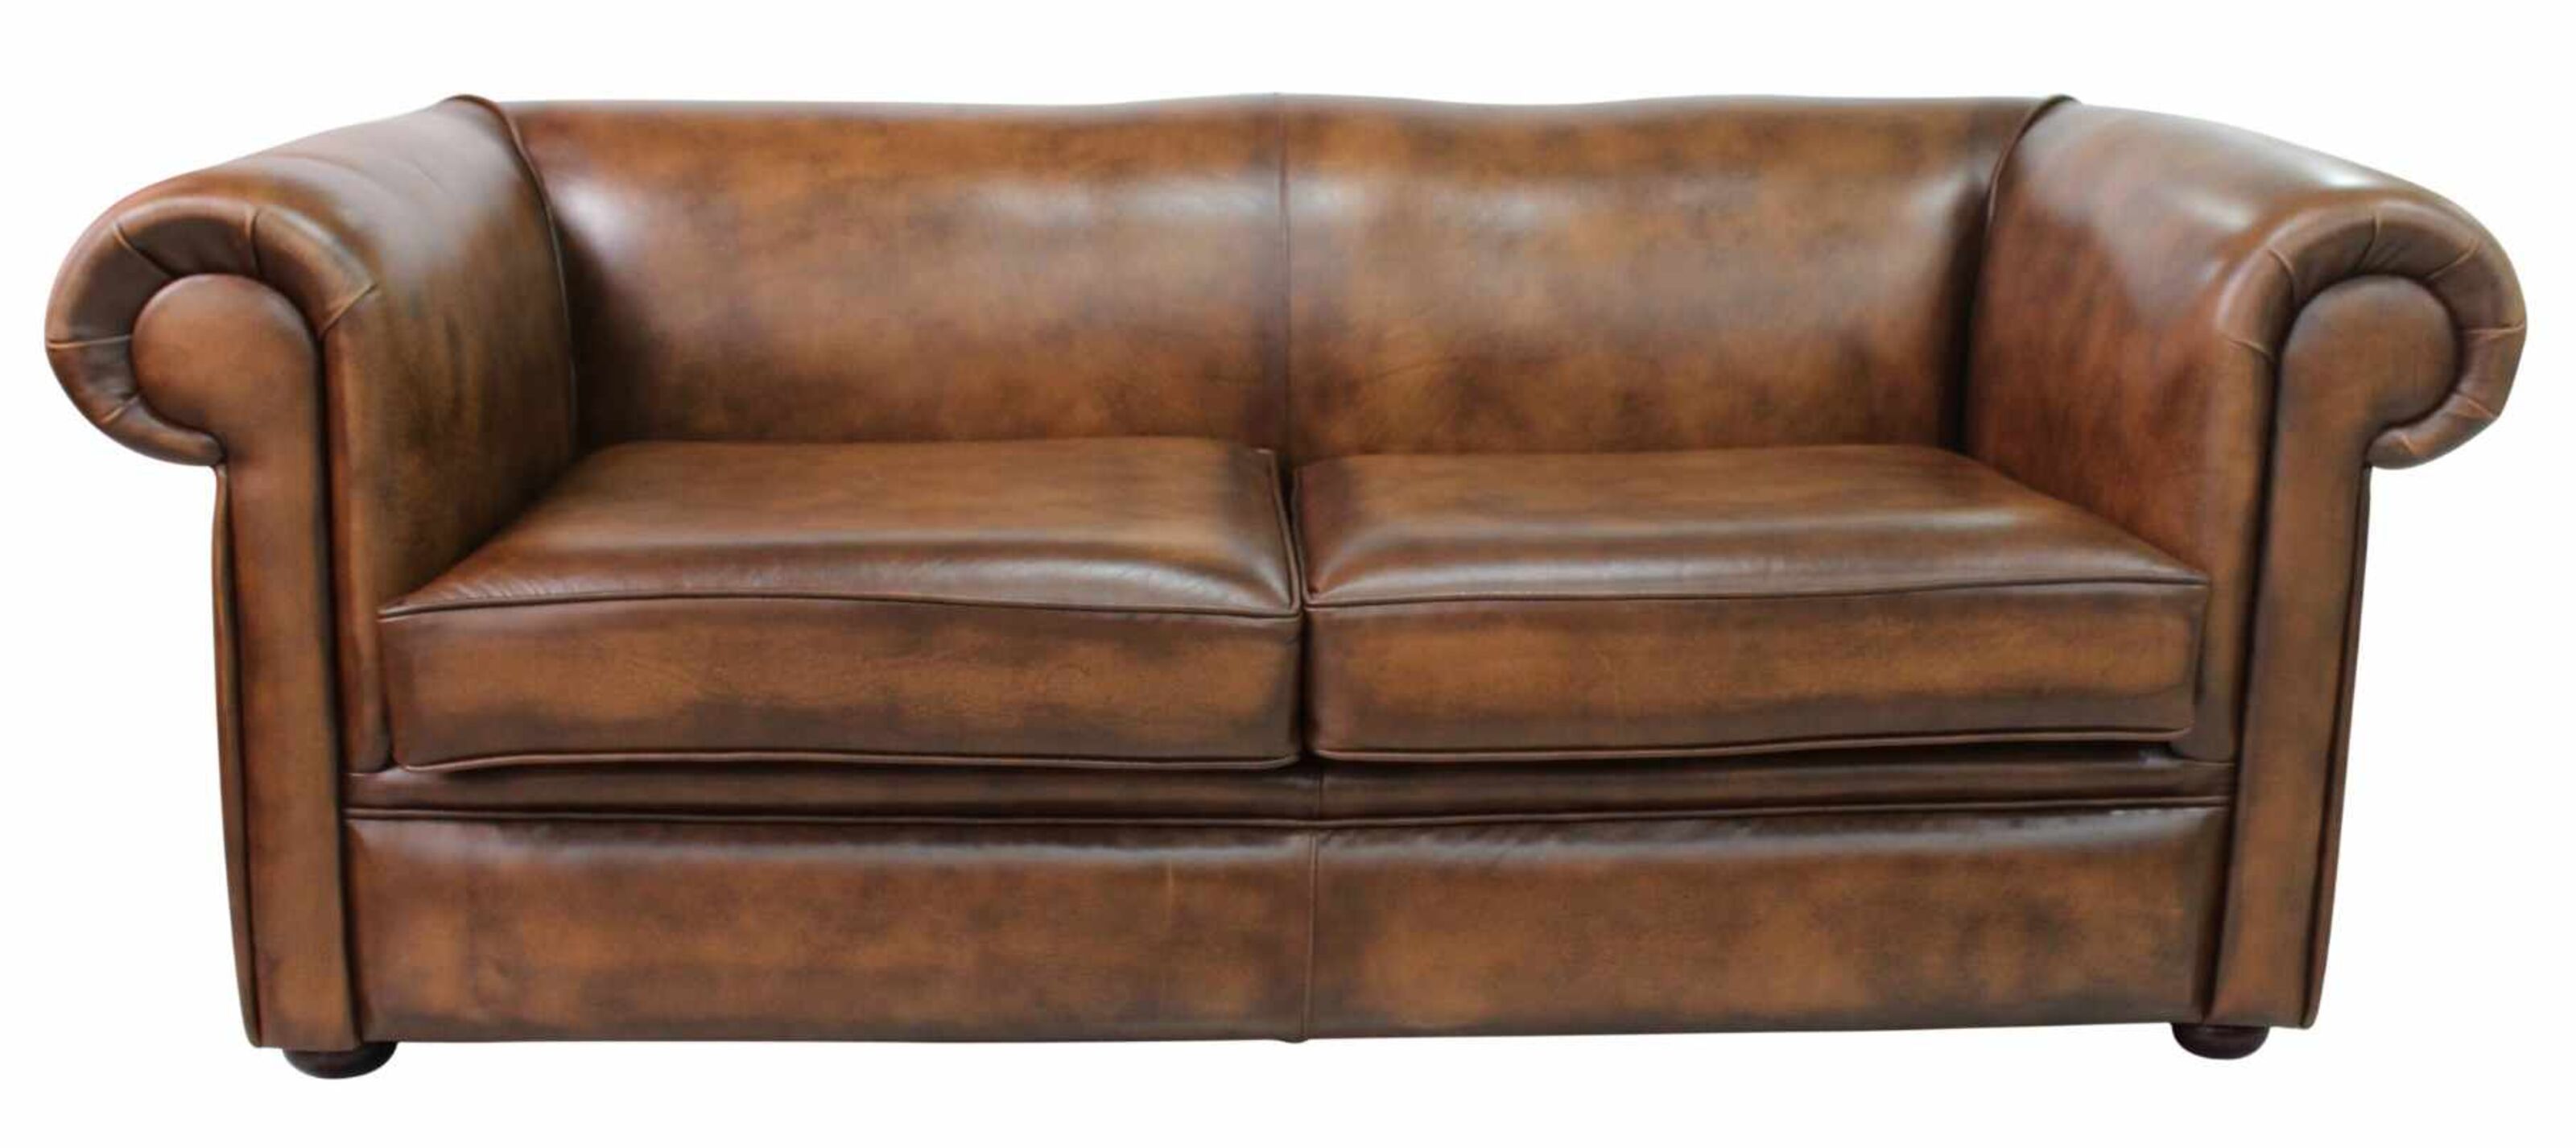 The Iconic Chesterfield A Luxurious Seat of Distinction  %Post Title